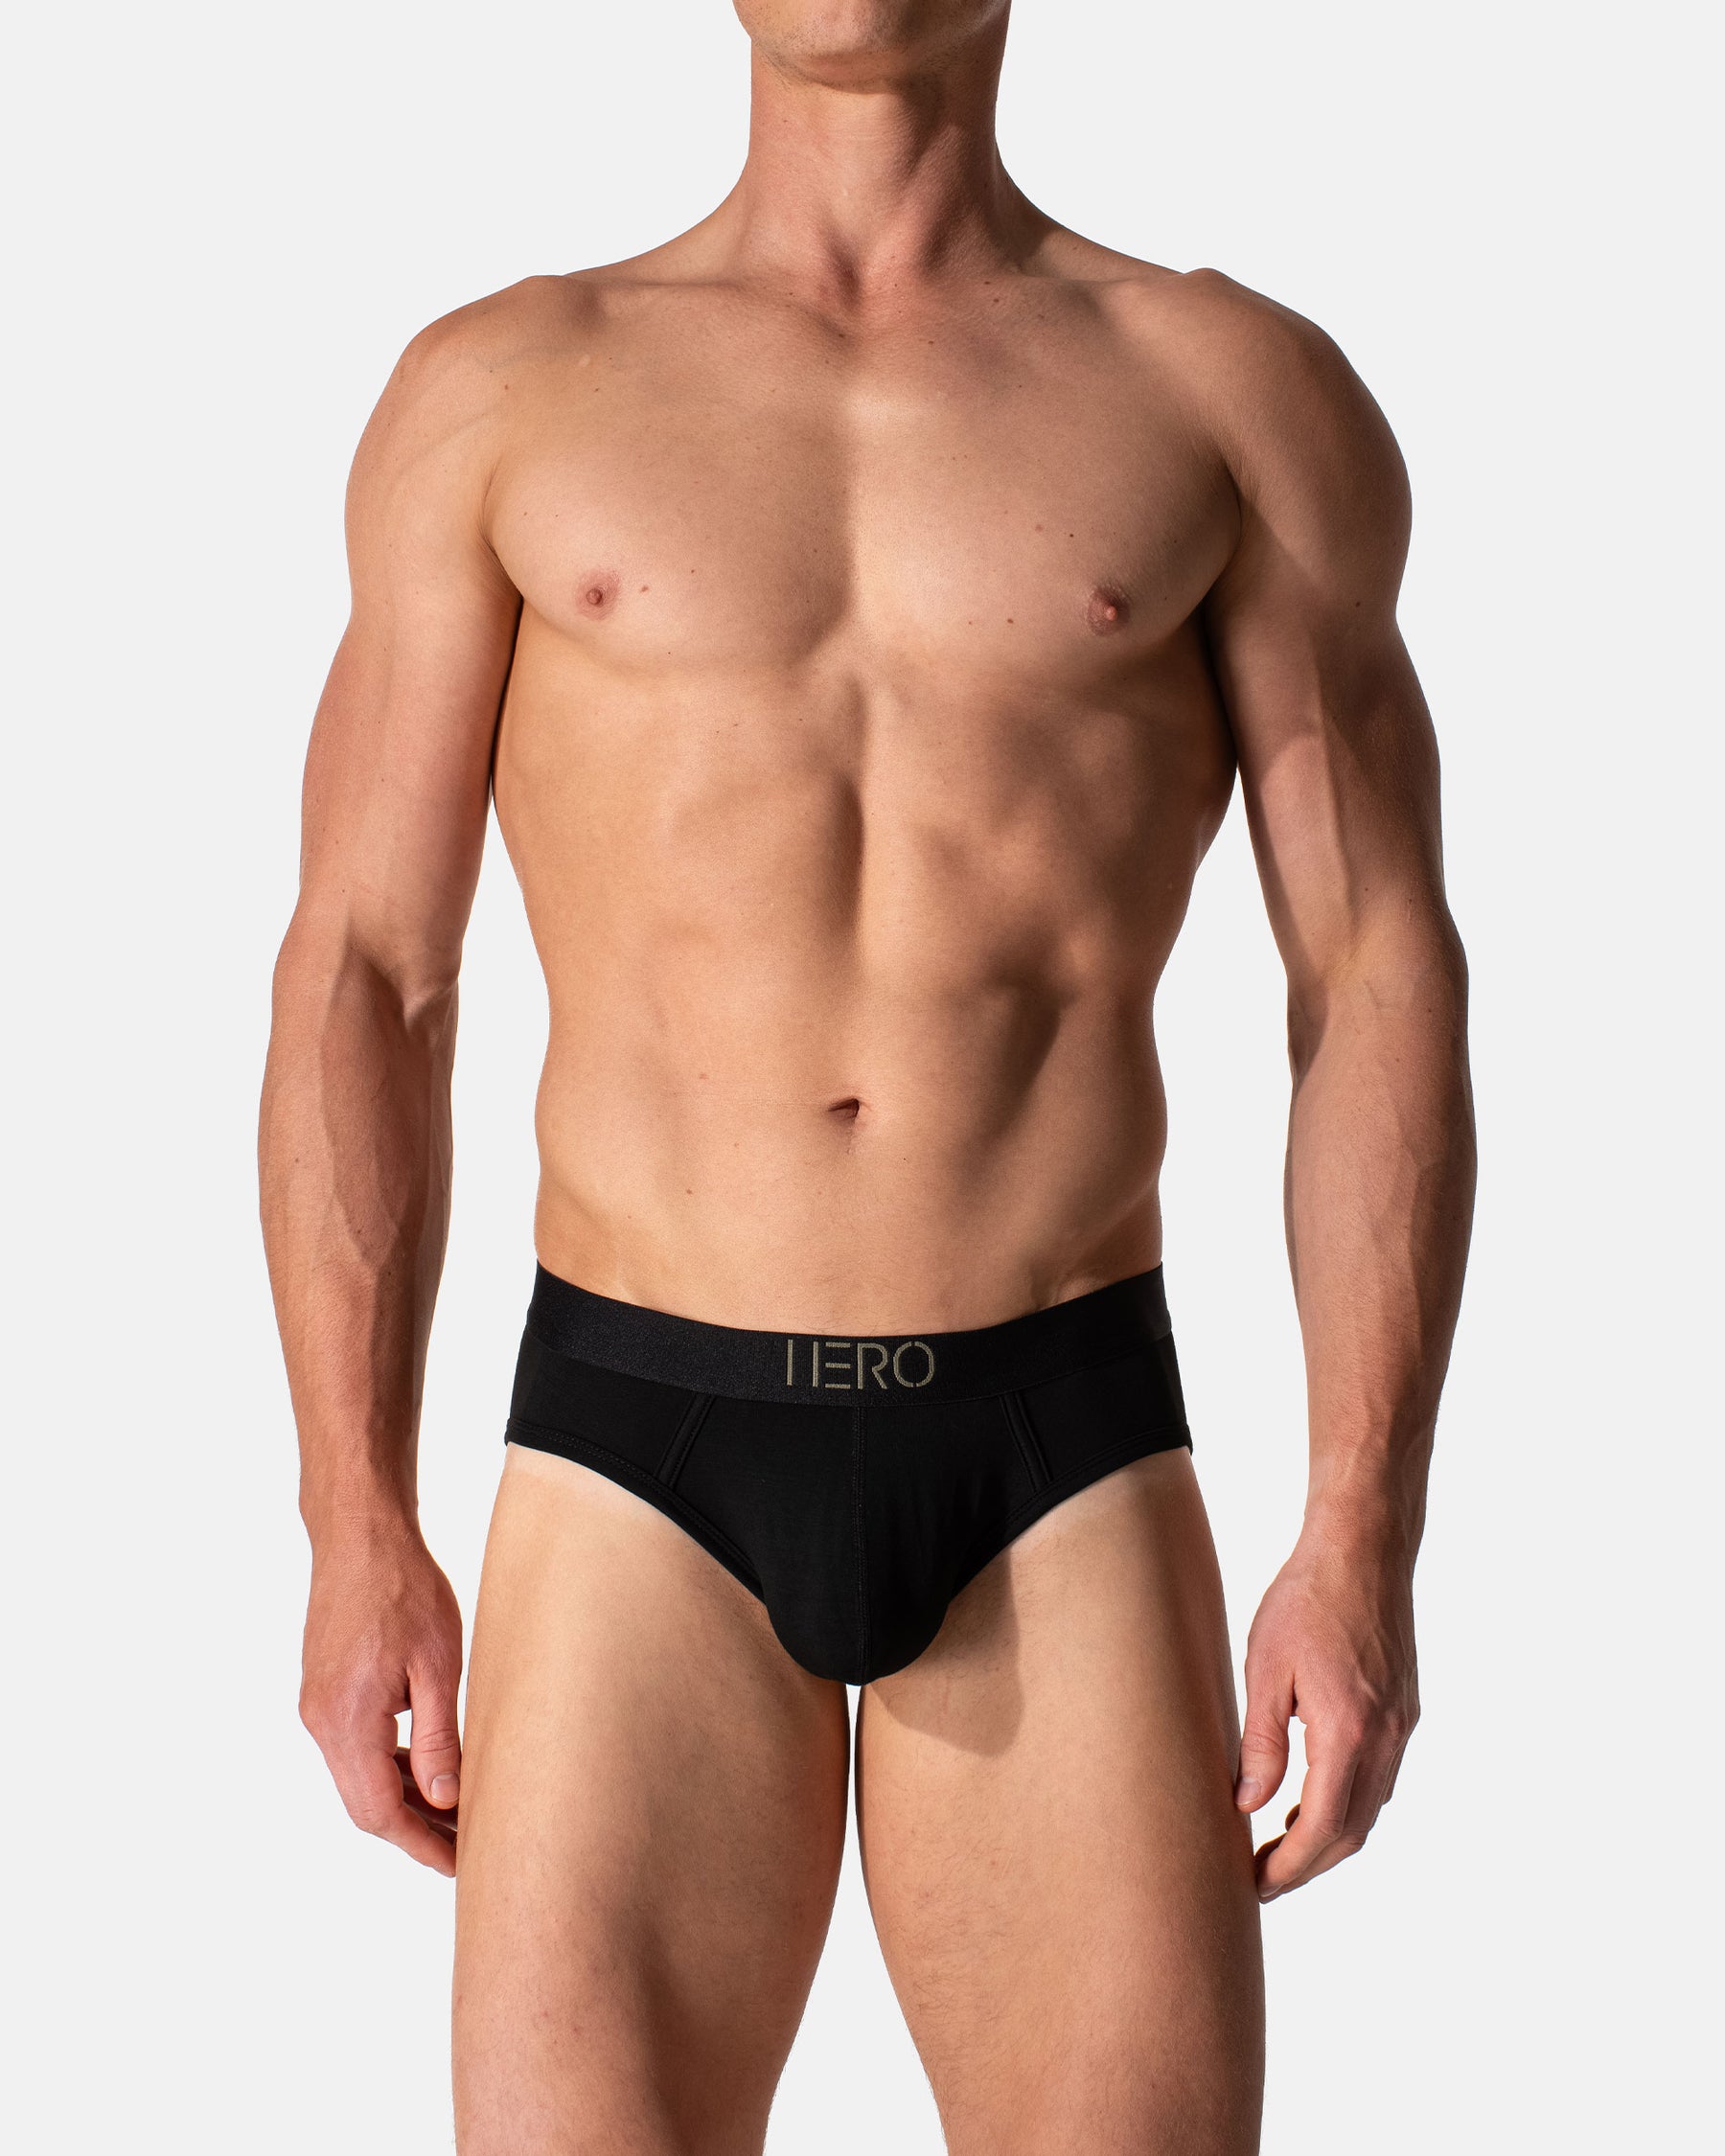 Top-notch undies with mood boosting messages. – DAILY BRIEFS